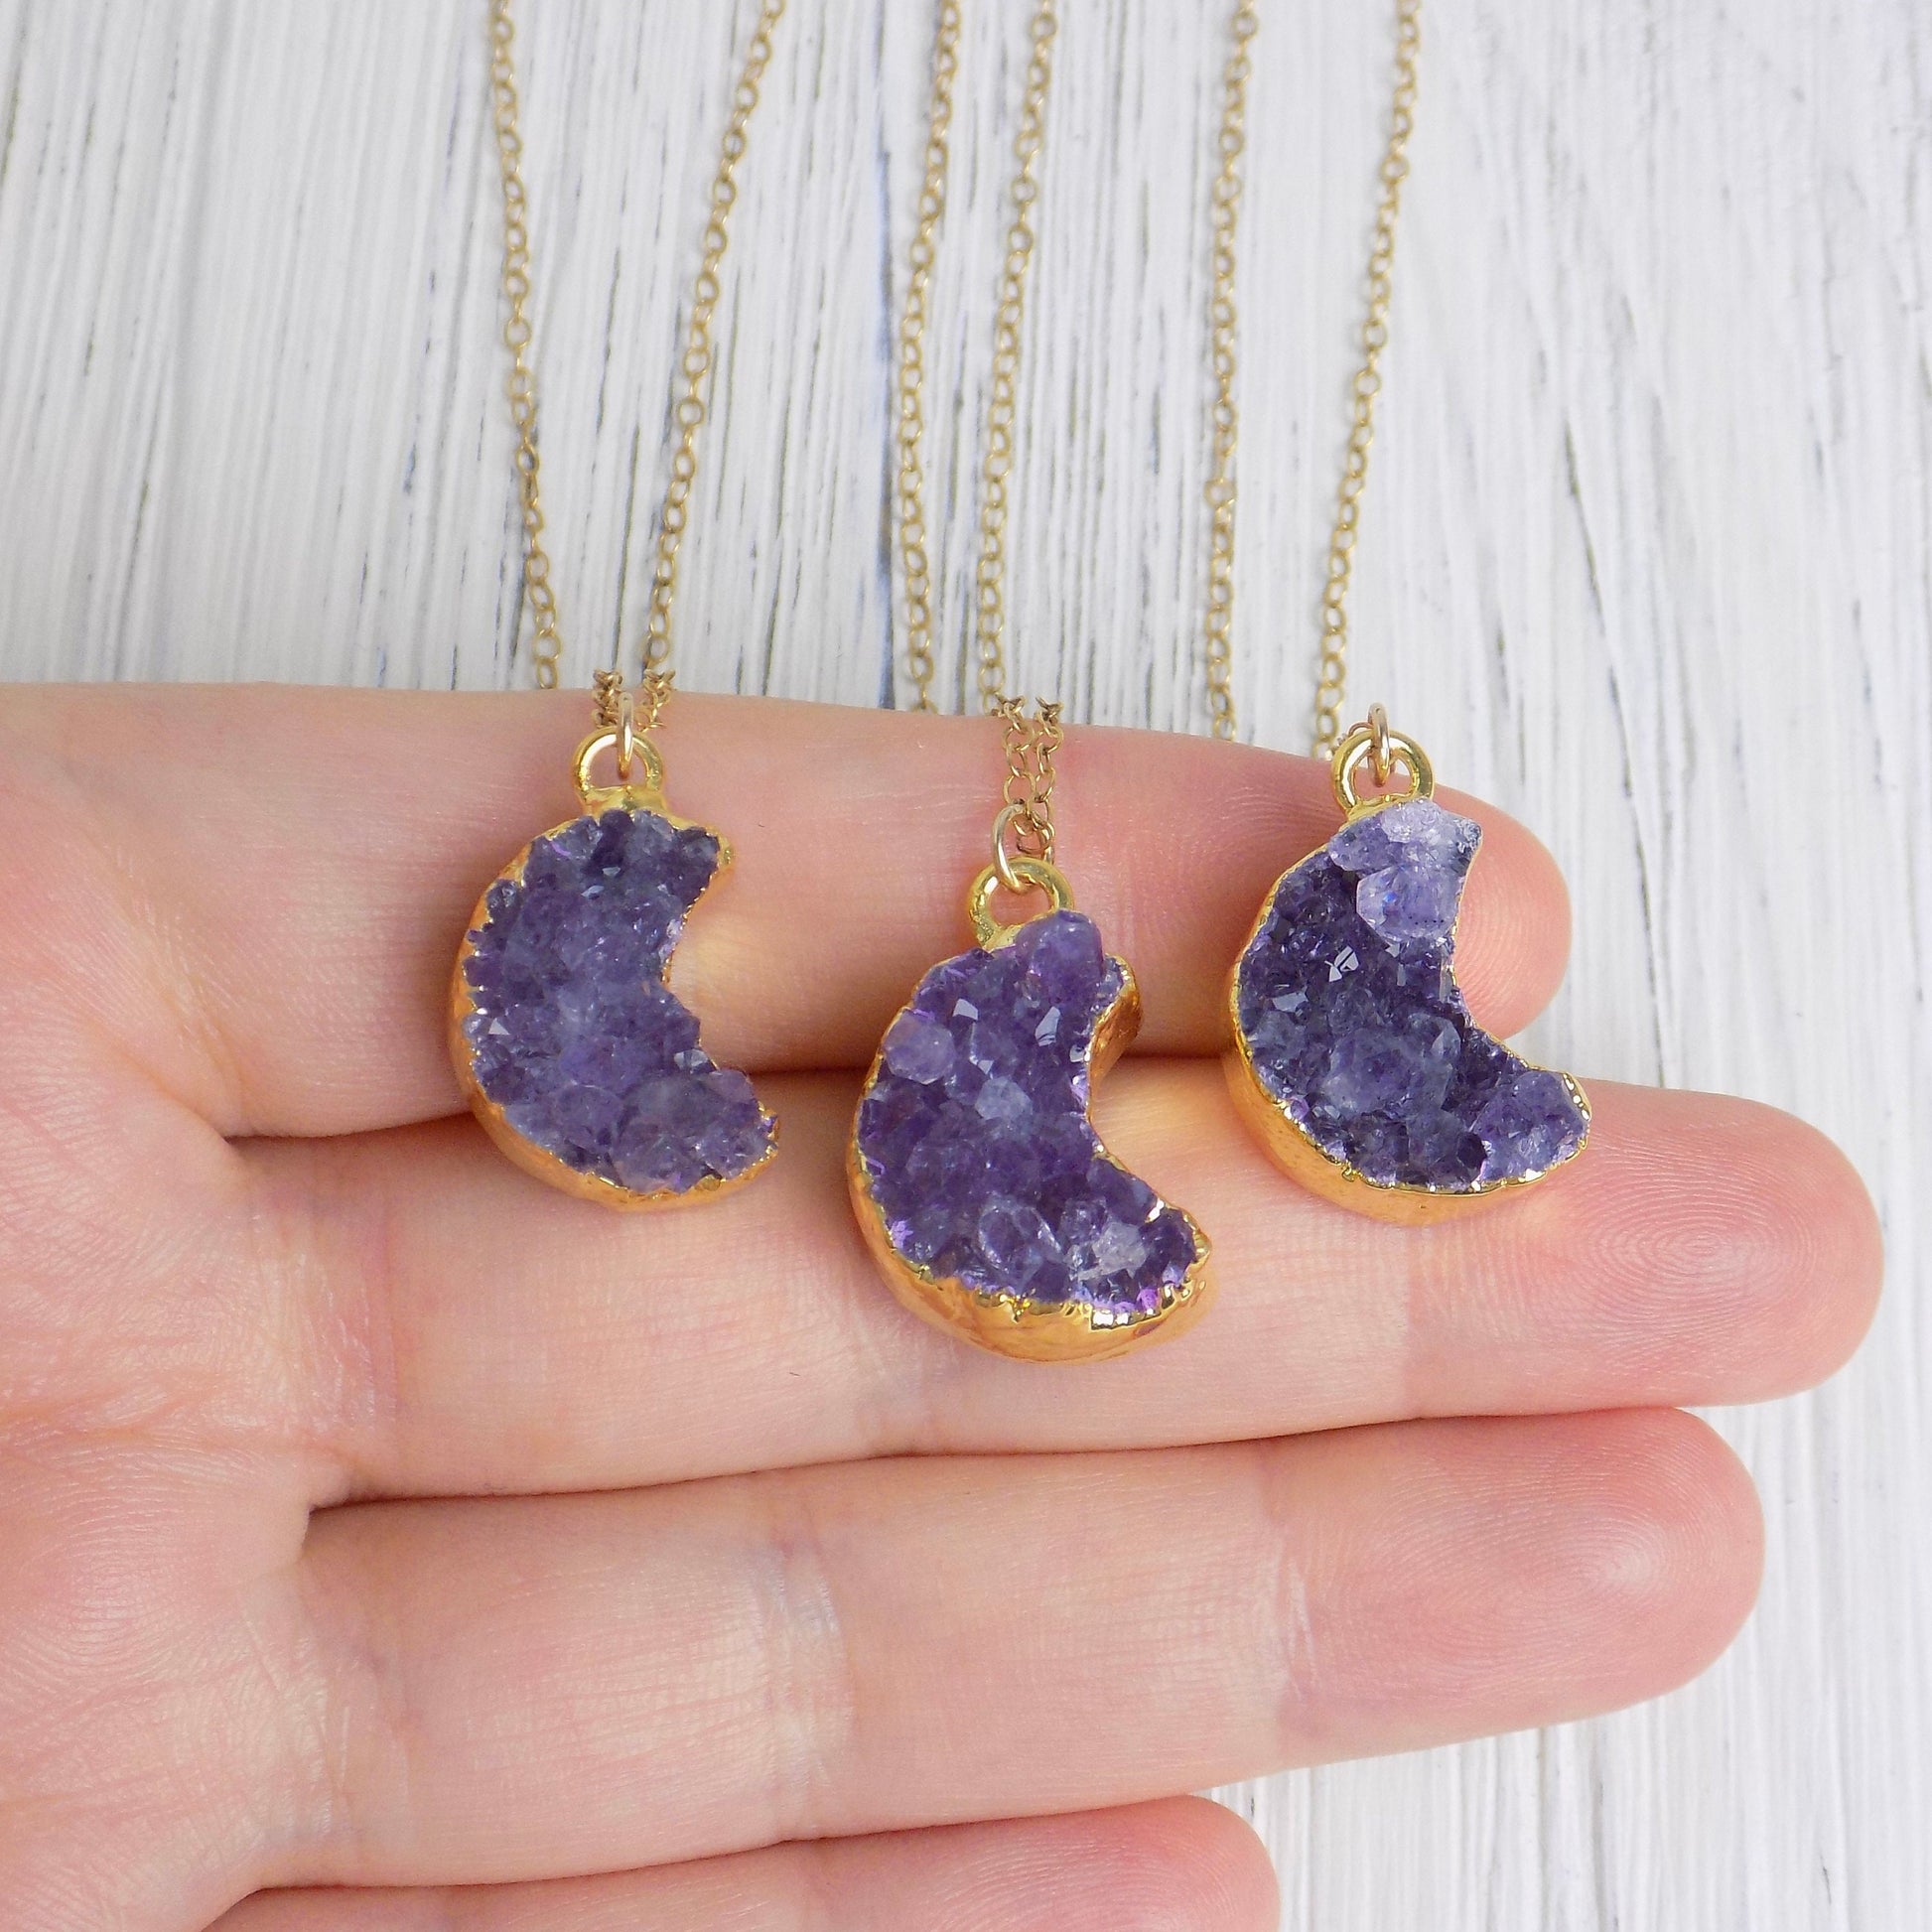 Amethyst Moon Necklace Gold, Crescent Moon, Purple Druzy Pendant Small, Christmas Gifts For Her, R14-02